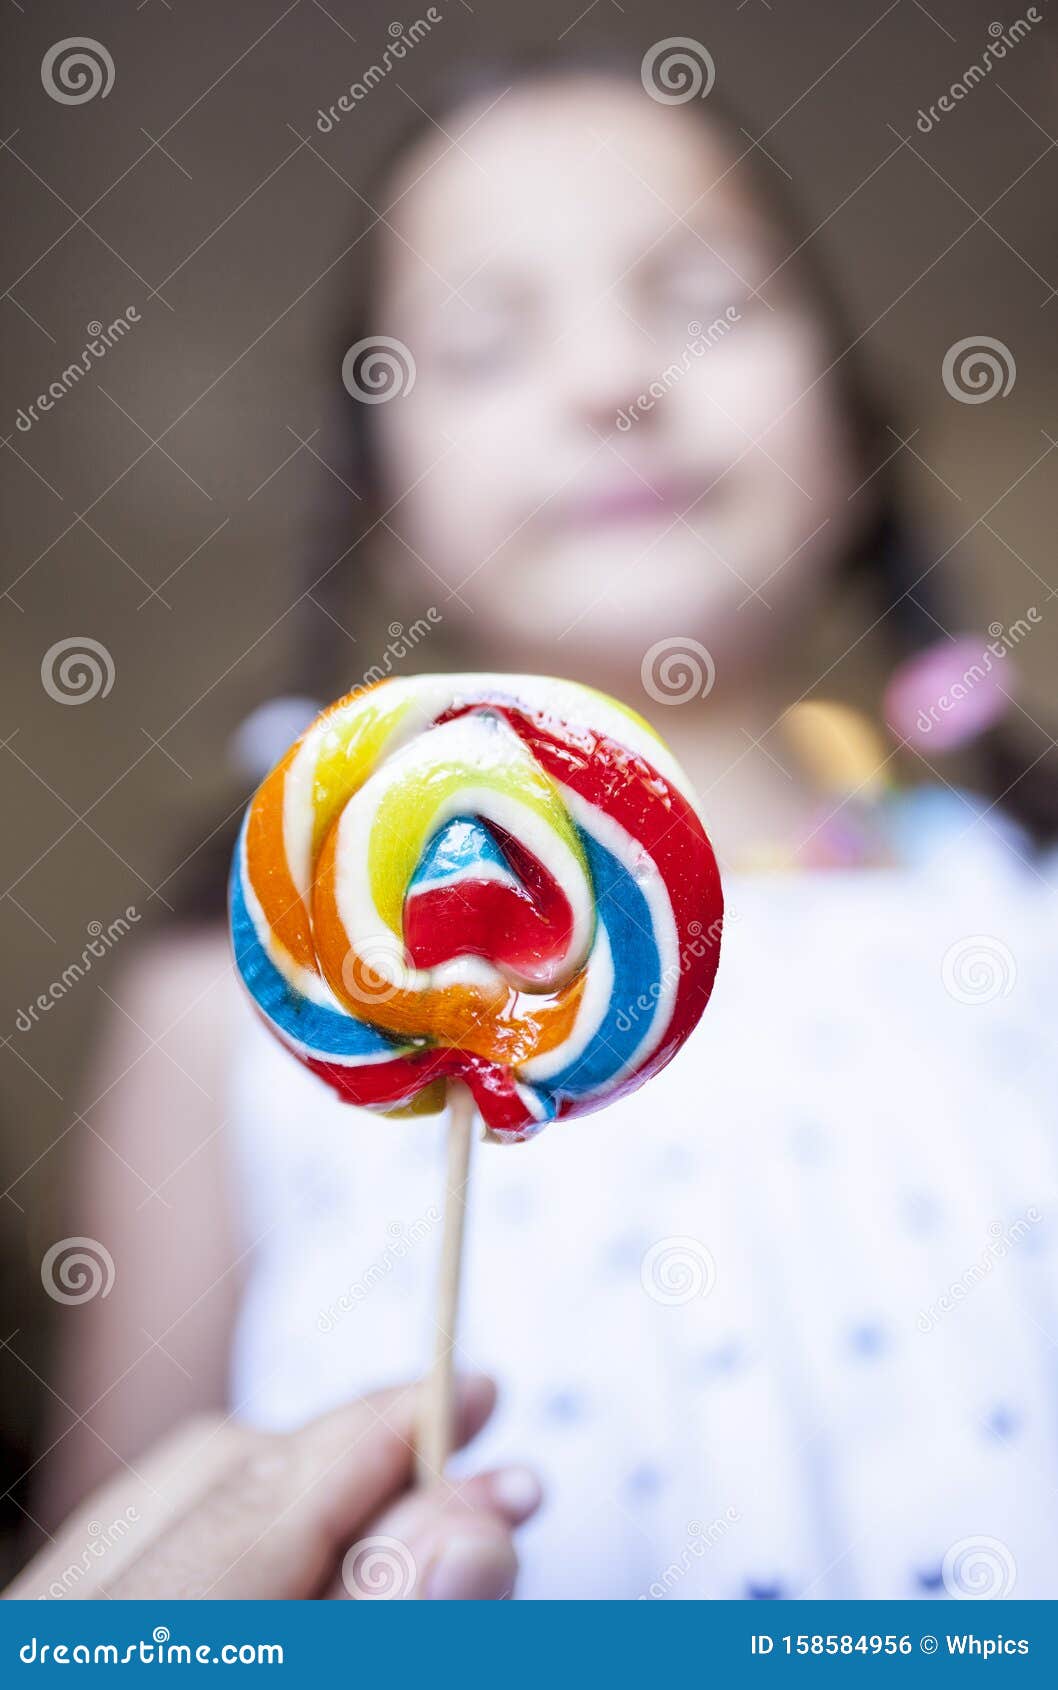 Child Girl with Colorful Big Lollipop Stock Photo - Image of female ...